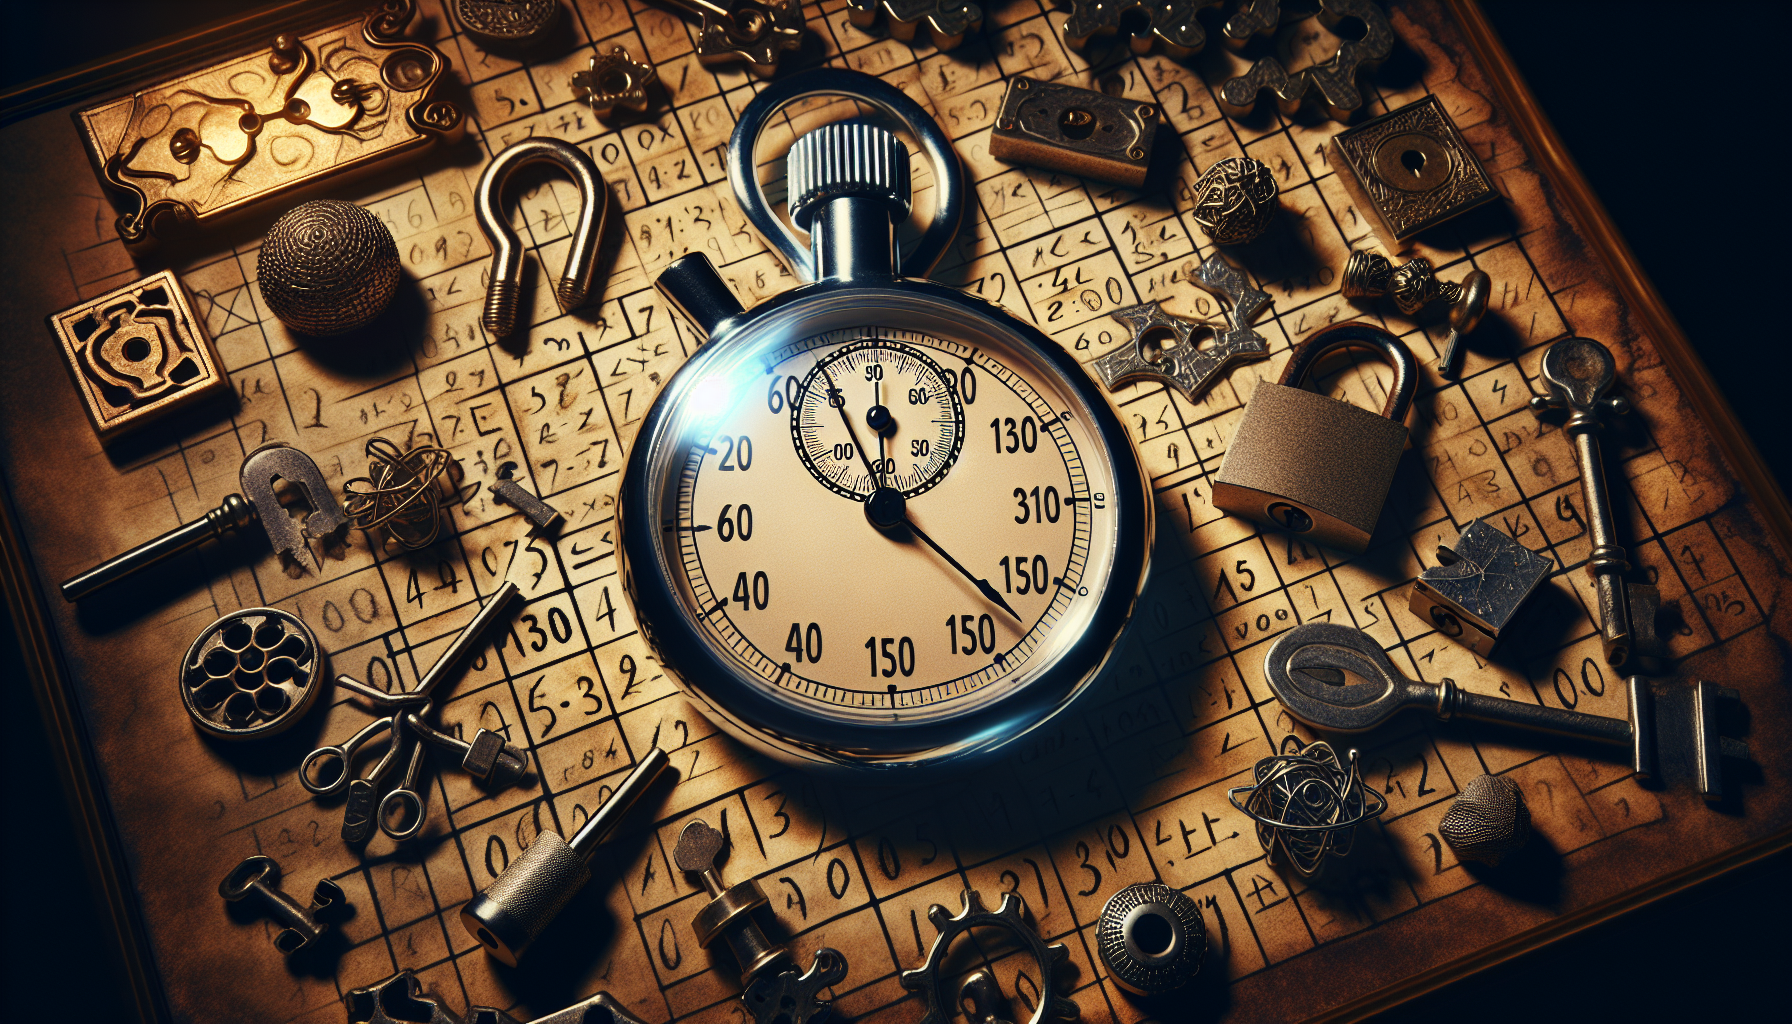 How Long Do You Have To Solve An Escape Room?